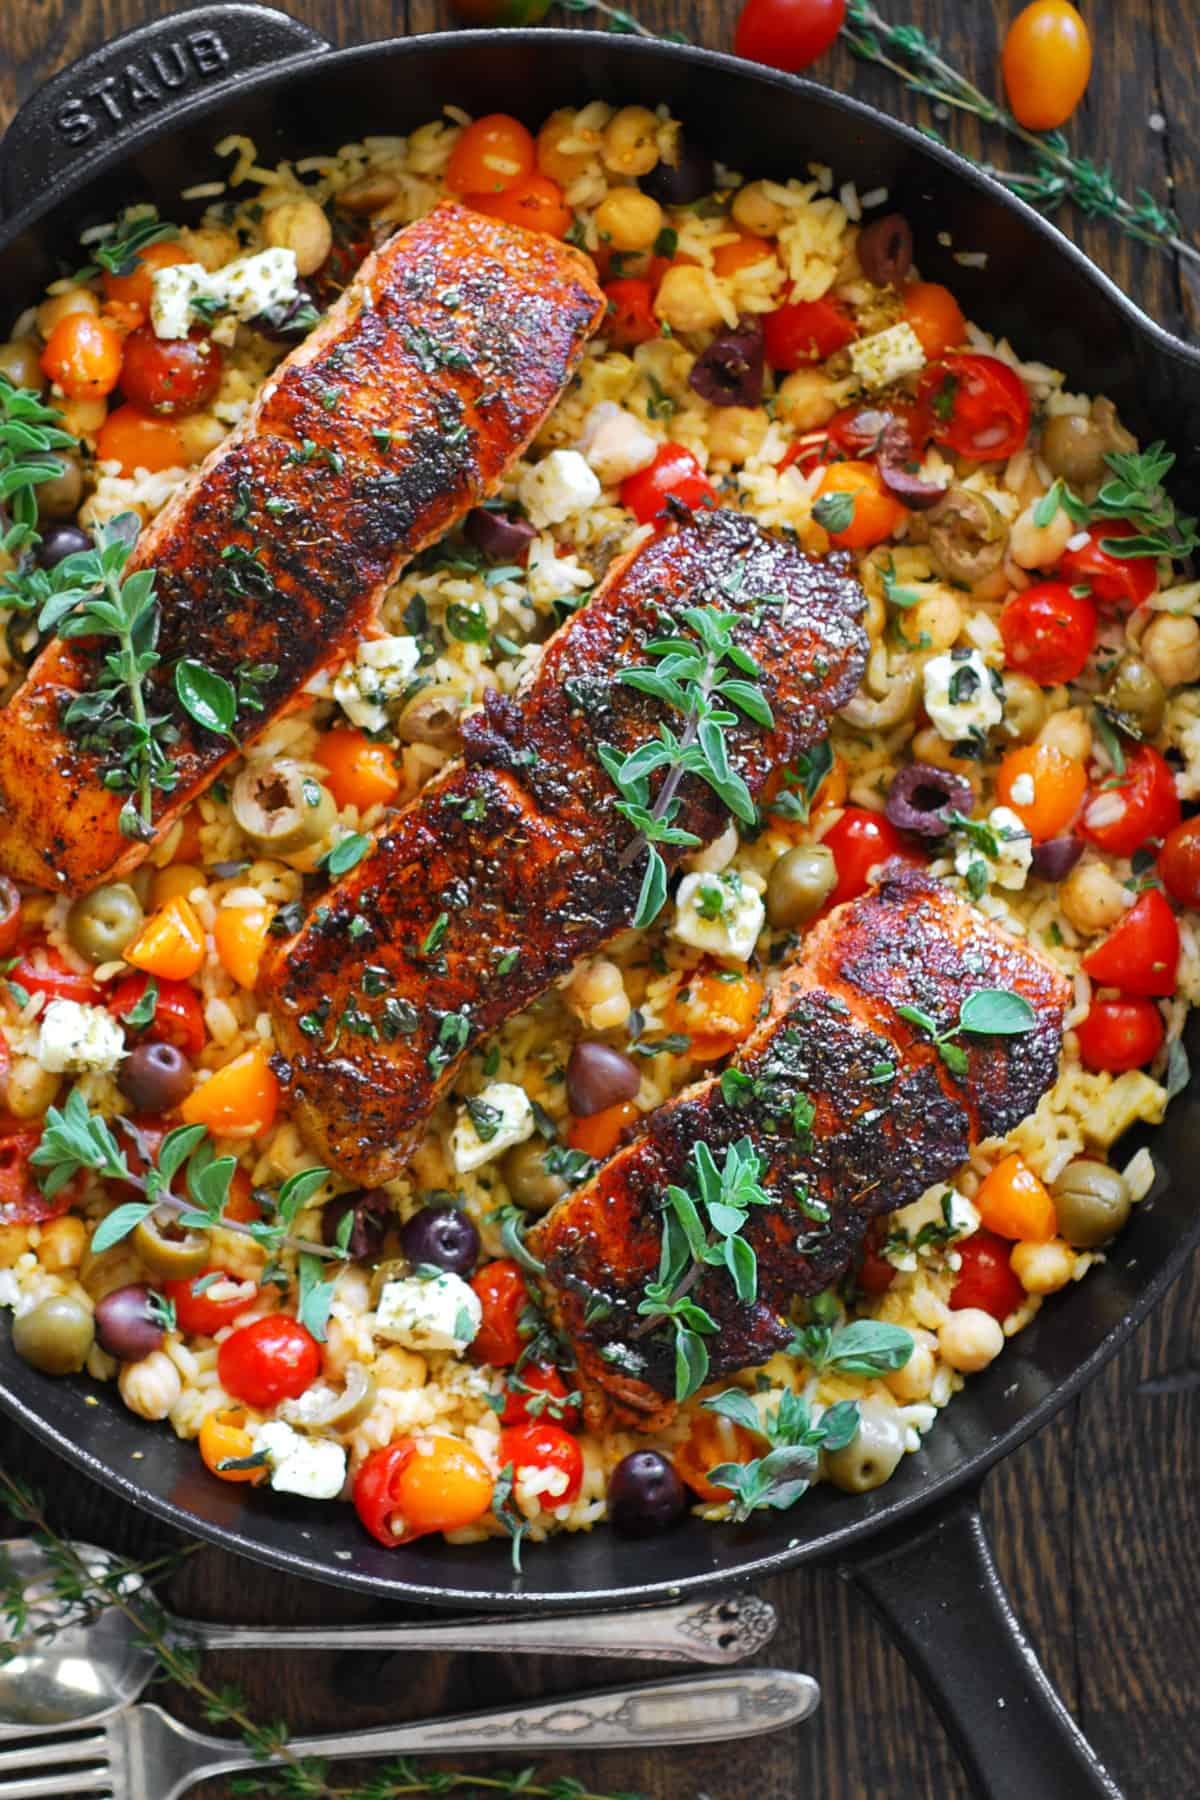 Mediterranean Salmon with Rice, Chickpeas, Cherry Tomatoes, Olives, and Feta Cheese - in a cast iron skillet.